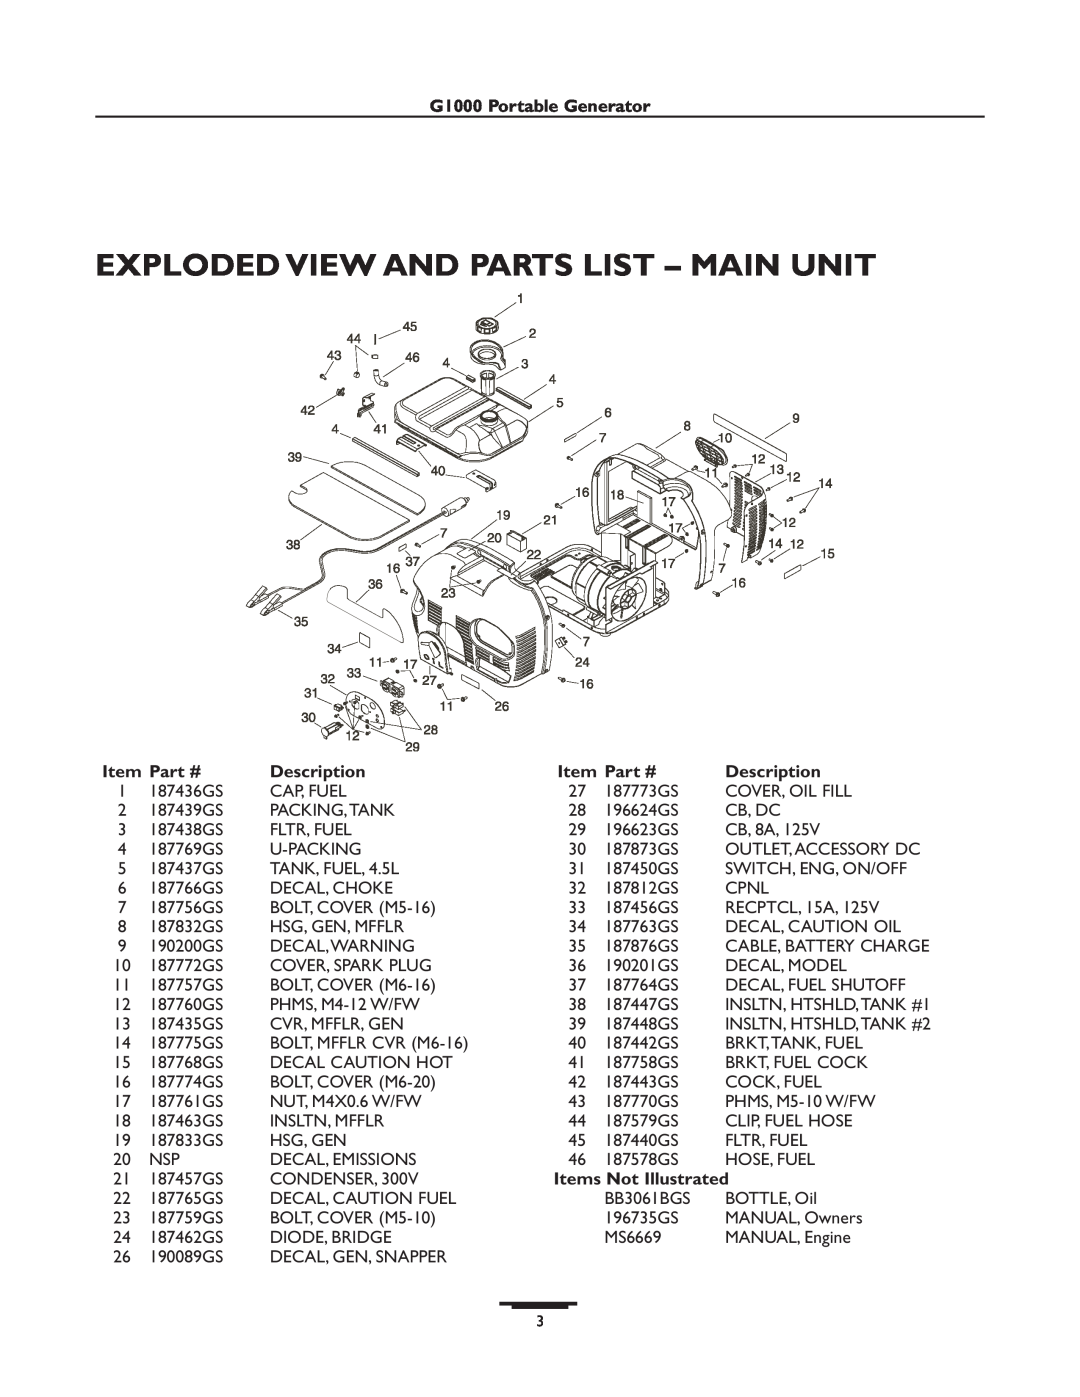 Snapper 01666-1 Items Not Illustrated, Exploded View And Parts List - Main Unit, G1000 Portable Generator, Description 